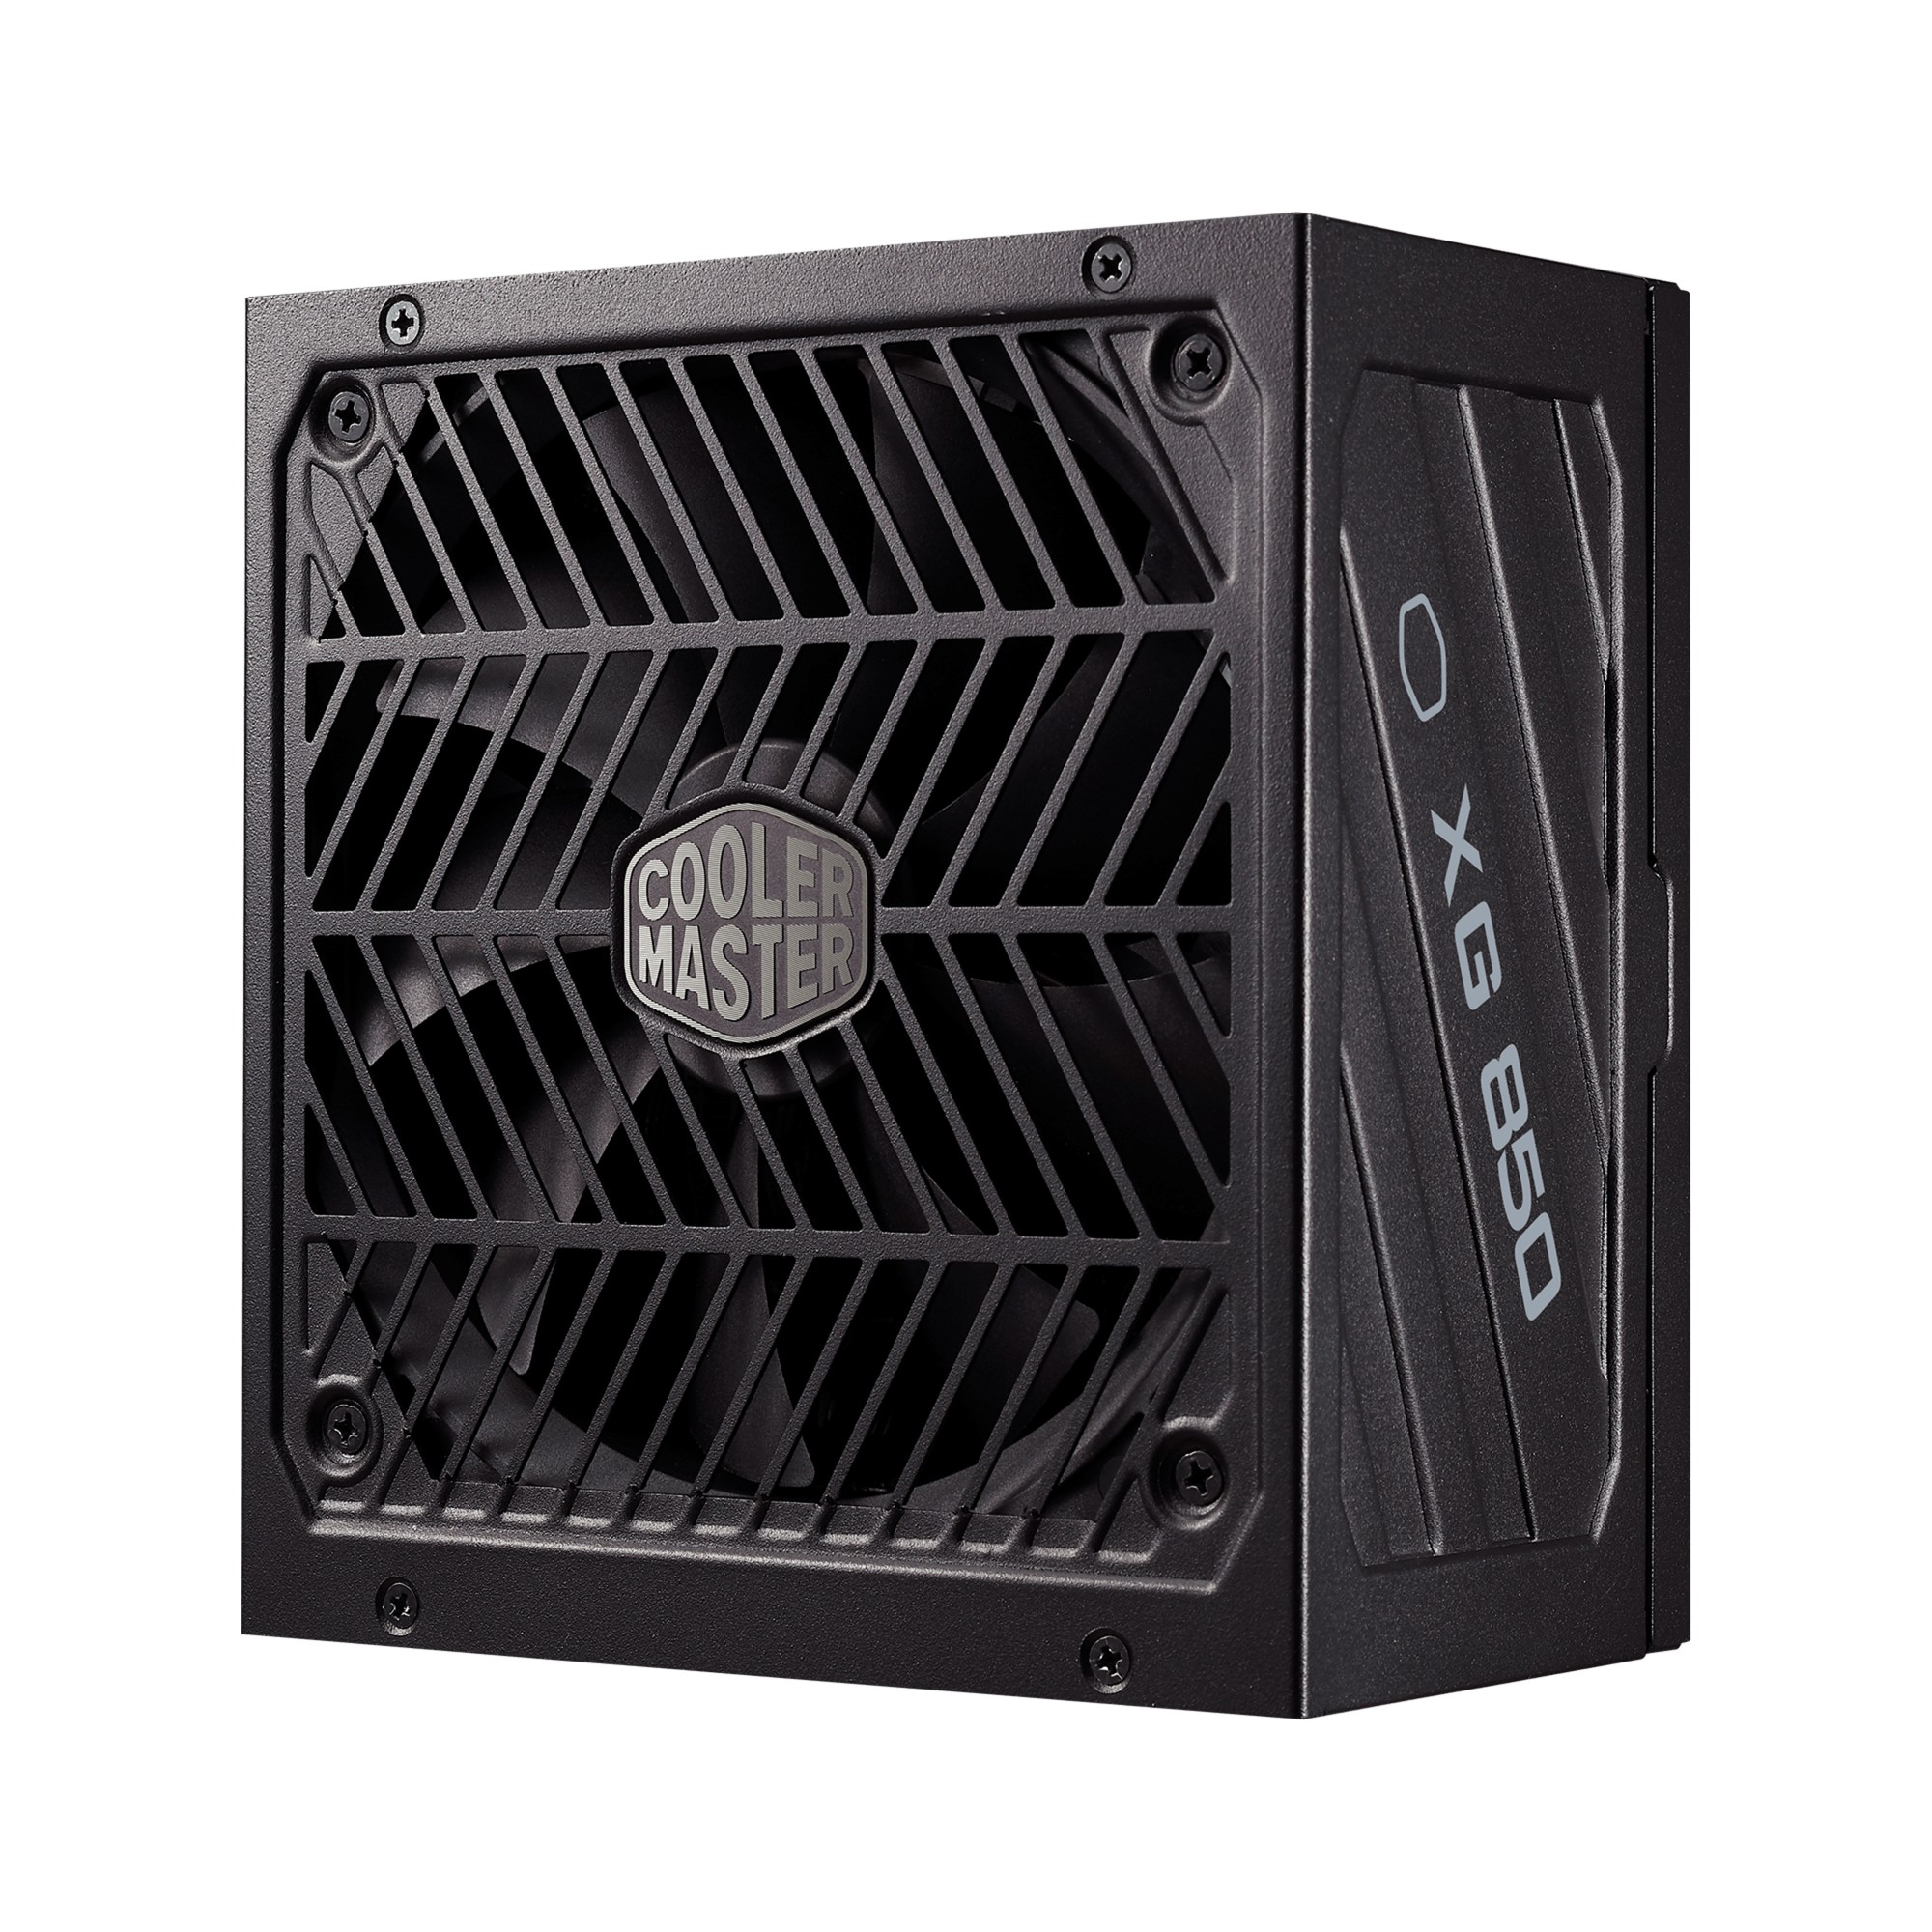 MPG-8501-AFBAP-UK COOLER MASTER XG850 Platinum PSU - 80 Plus Platinum 850W, Fully Modular, Quiet 135mm Fan, Smart Thermal Control Mode with Hybrid Switch,